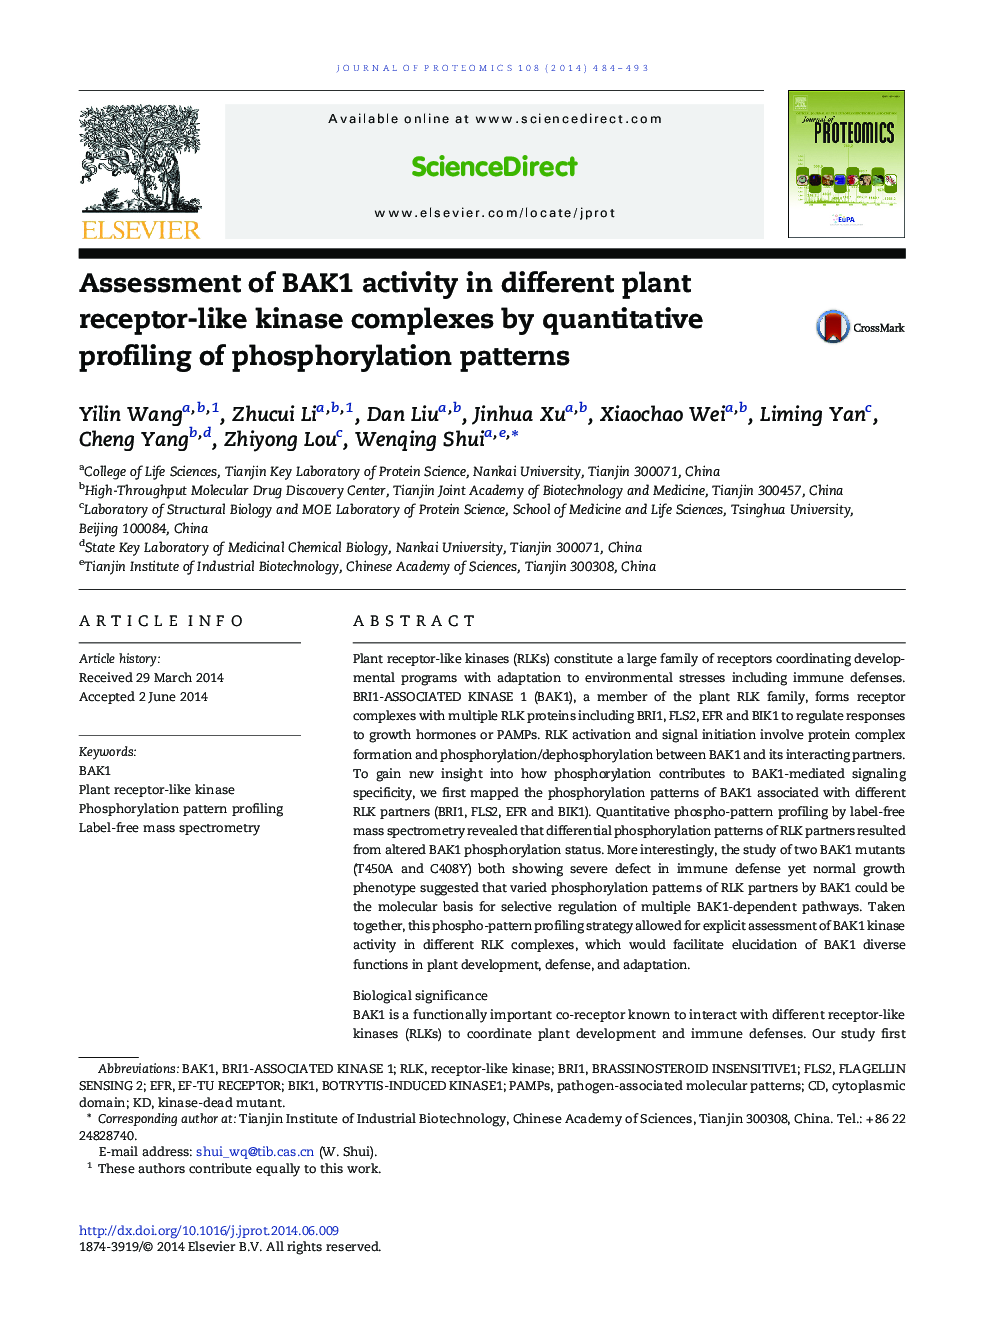 Assessment of BAK1 activity in different plant receptor-like kinase complexes by quantitative profiling of phosphorylation patterns